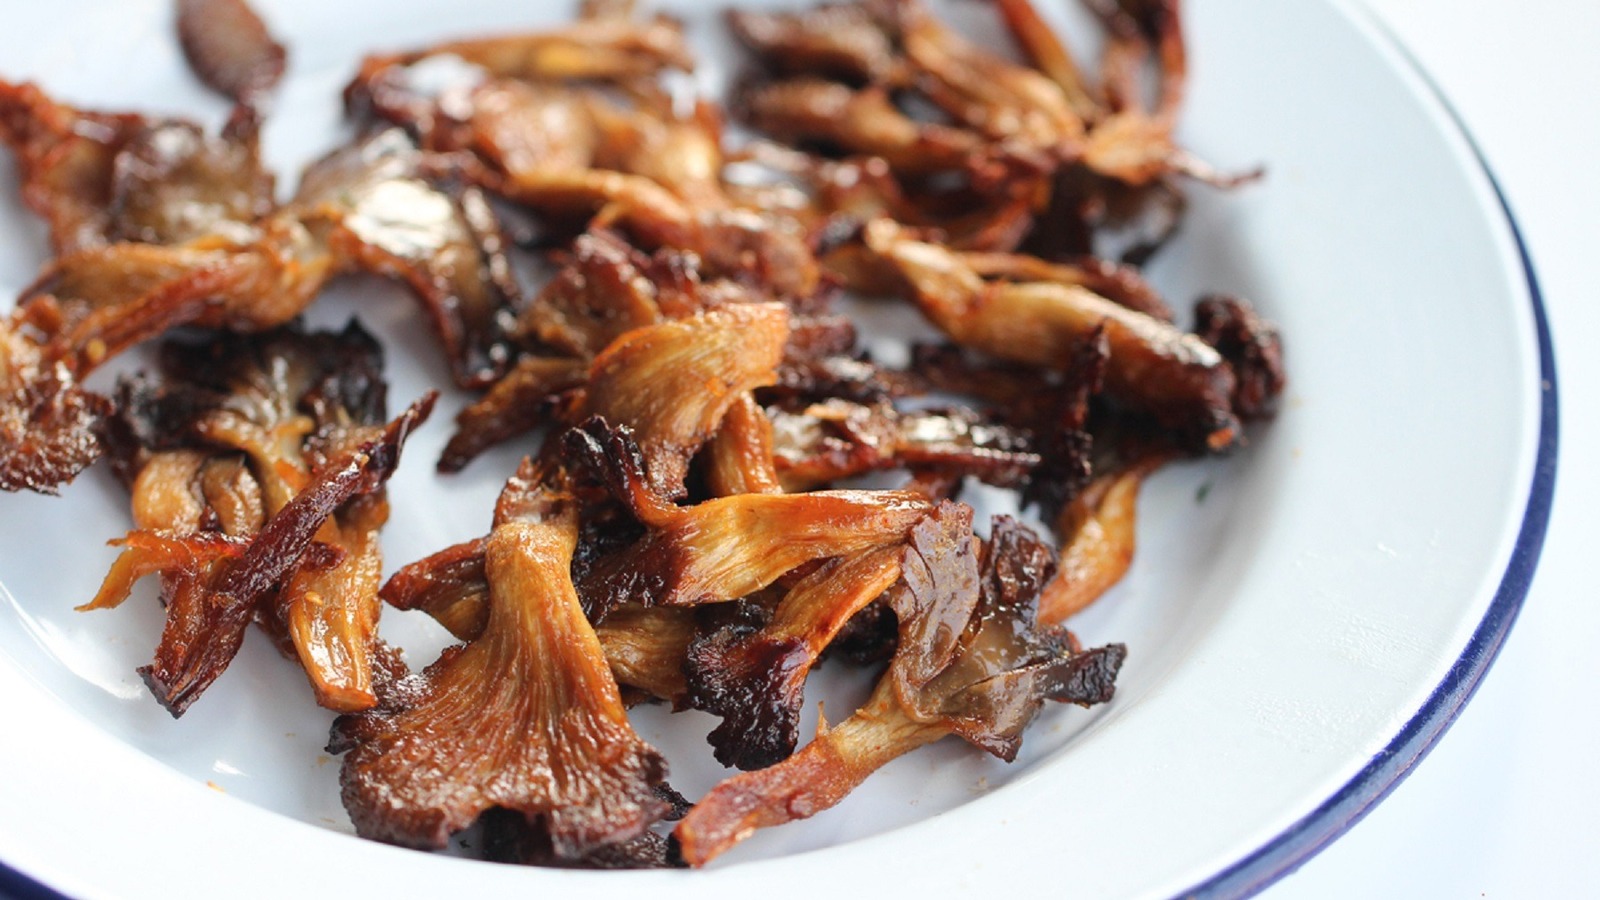 Easy Oyster Mushroom Jerky Recipe That Delivers A Smoky, Sweet Taste